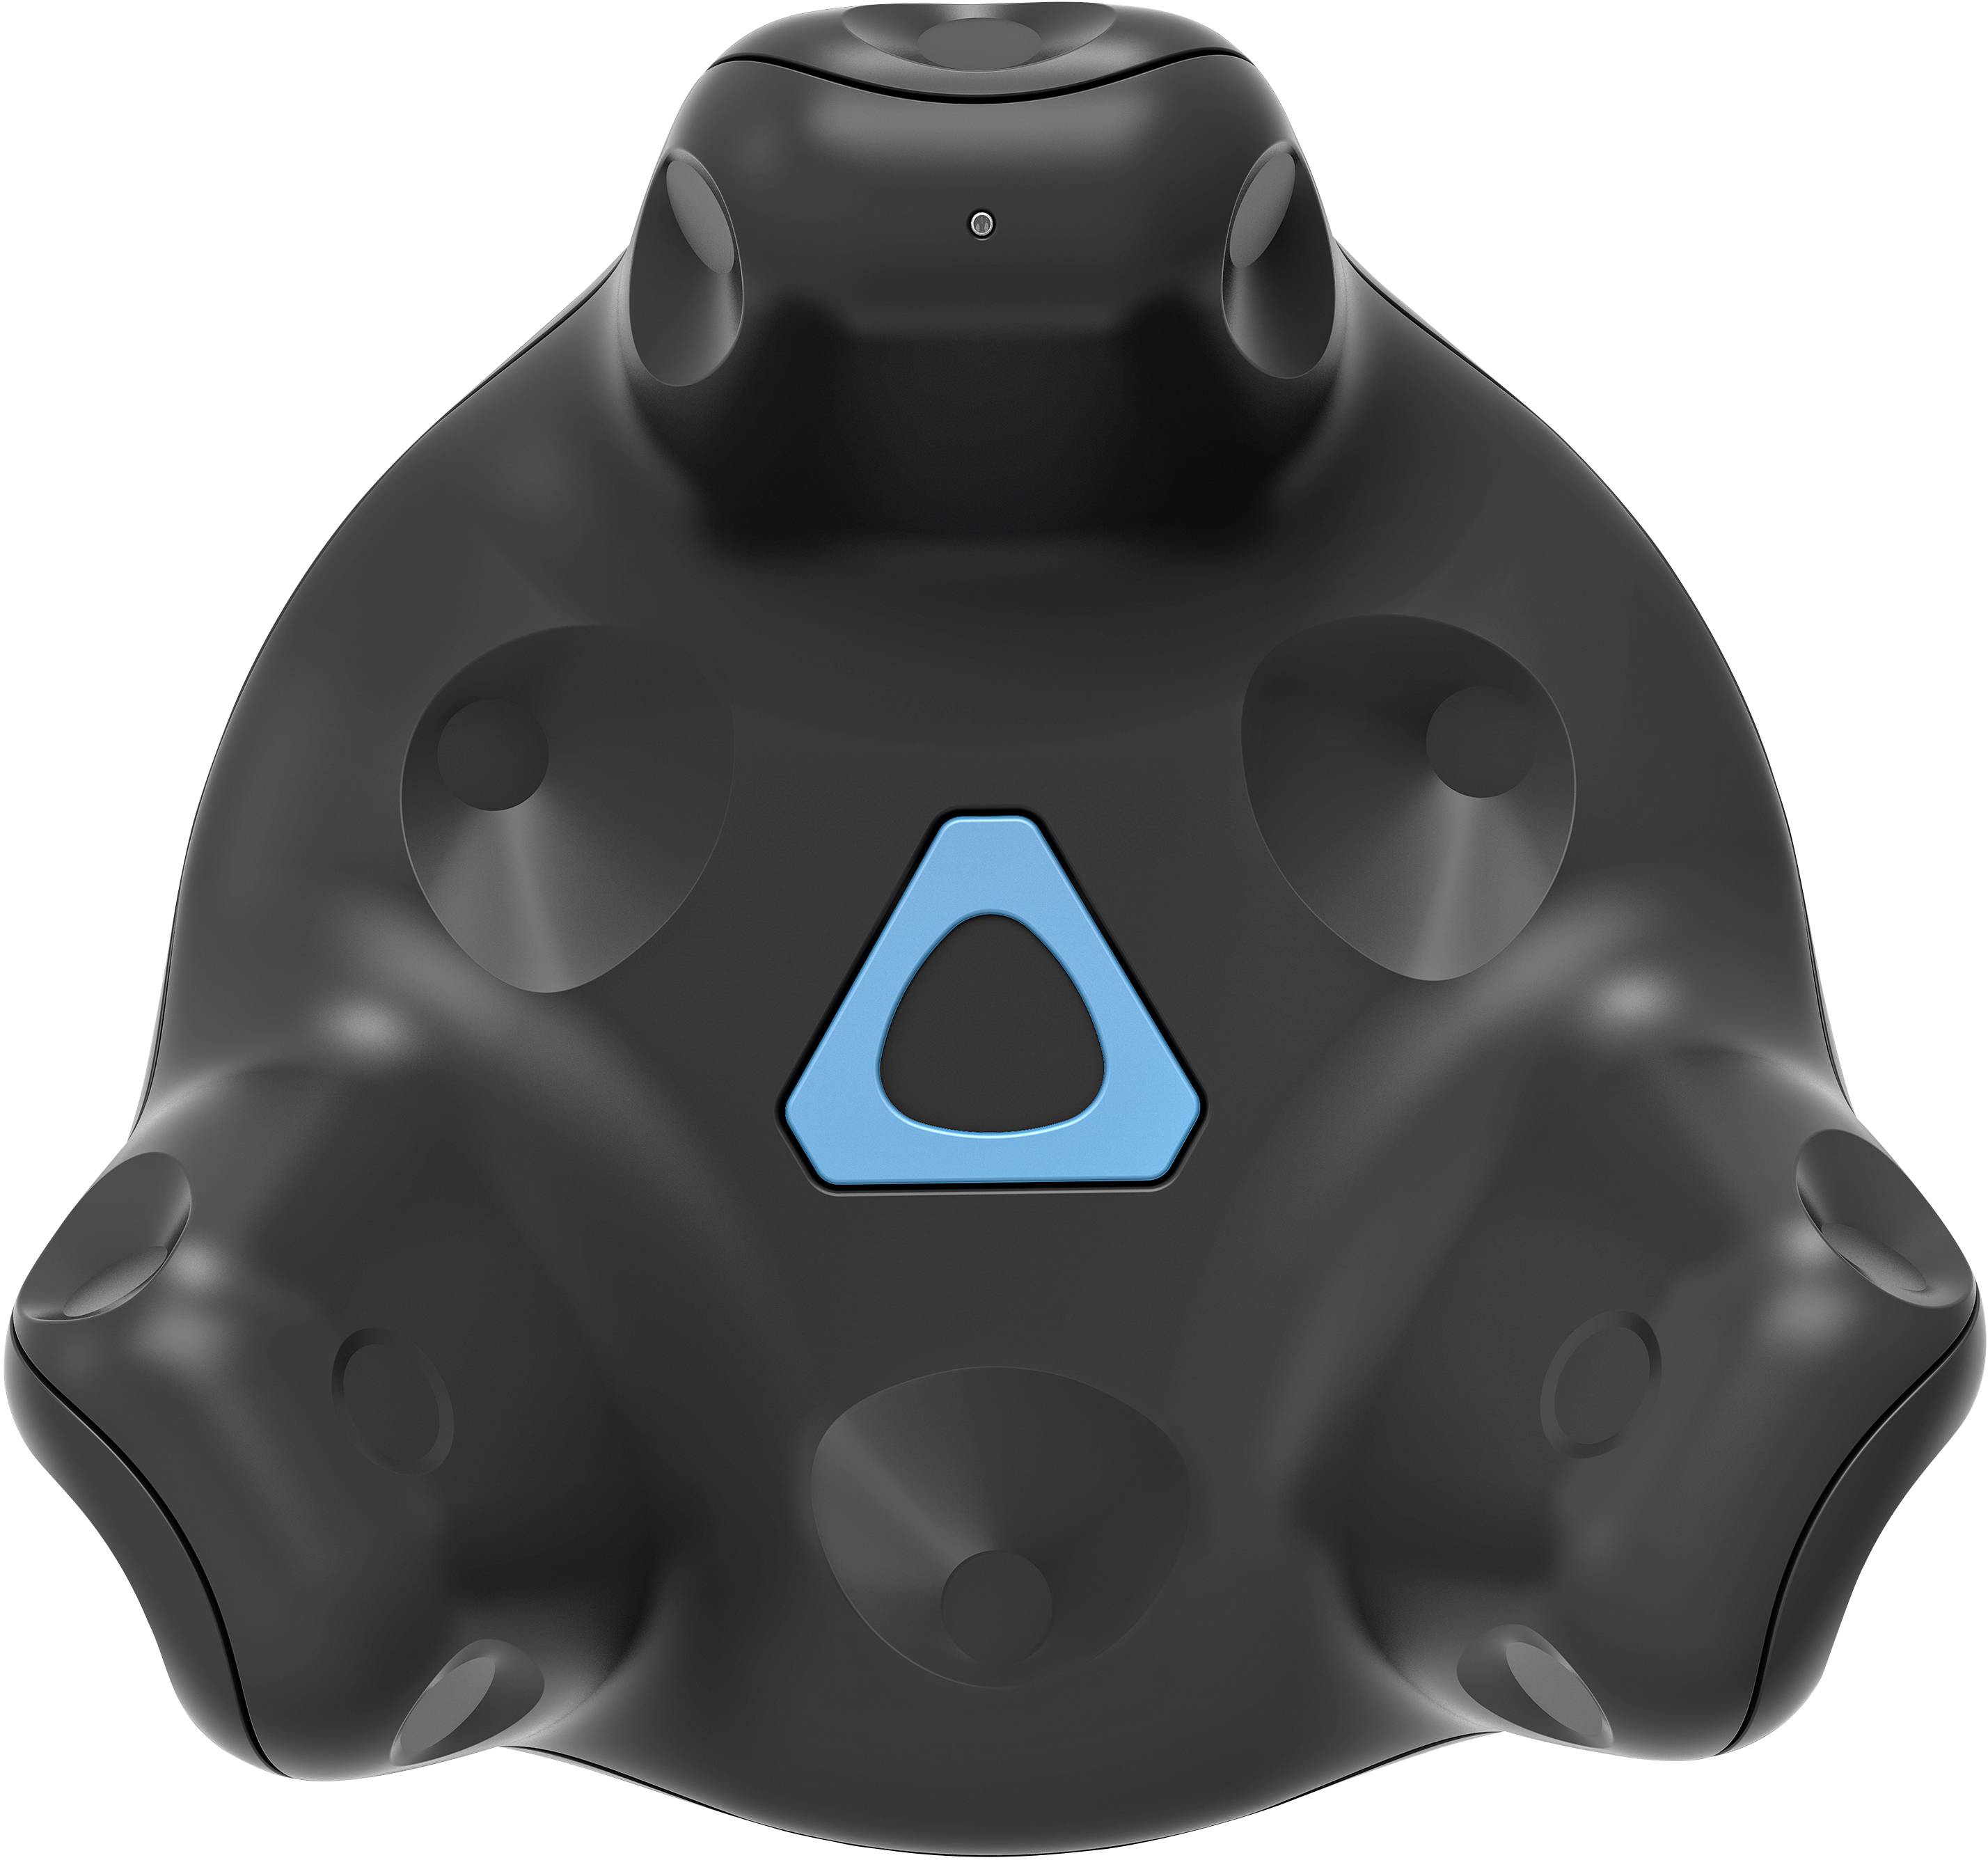 HTC Vive Tracker 2018 Tracker Compatible with (VR accessories): HTC